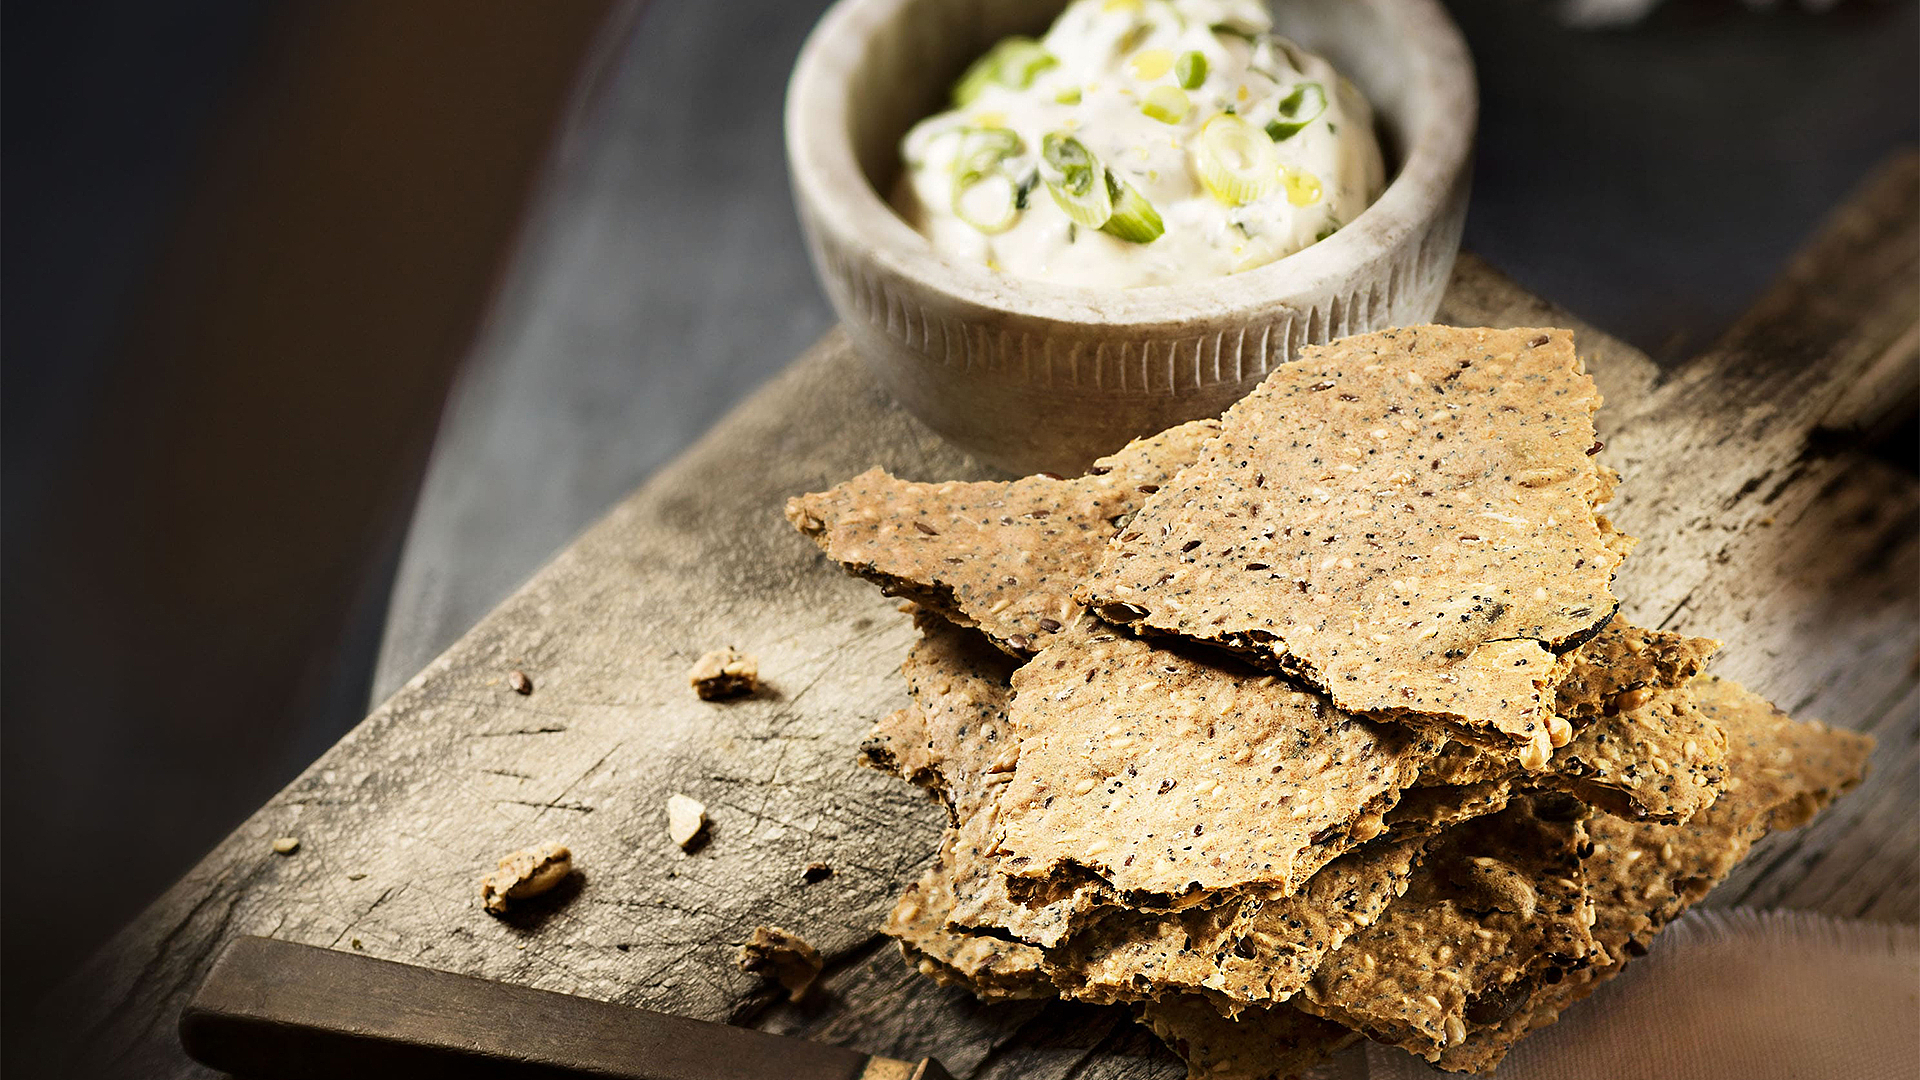 Home-made crispbread with a herb dip